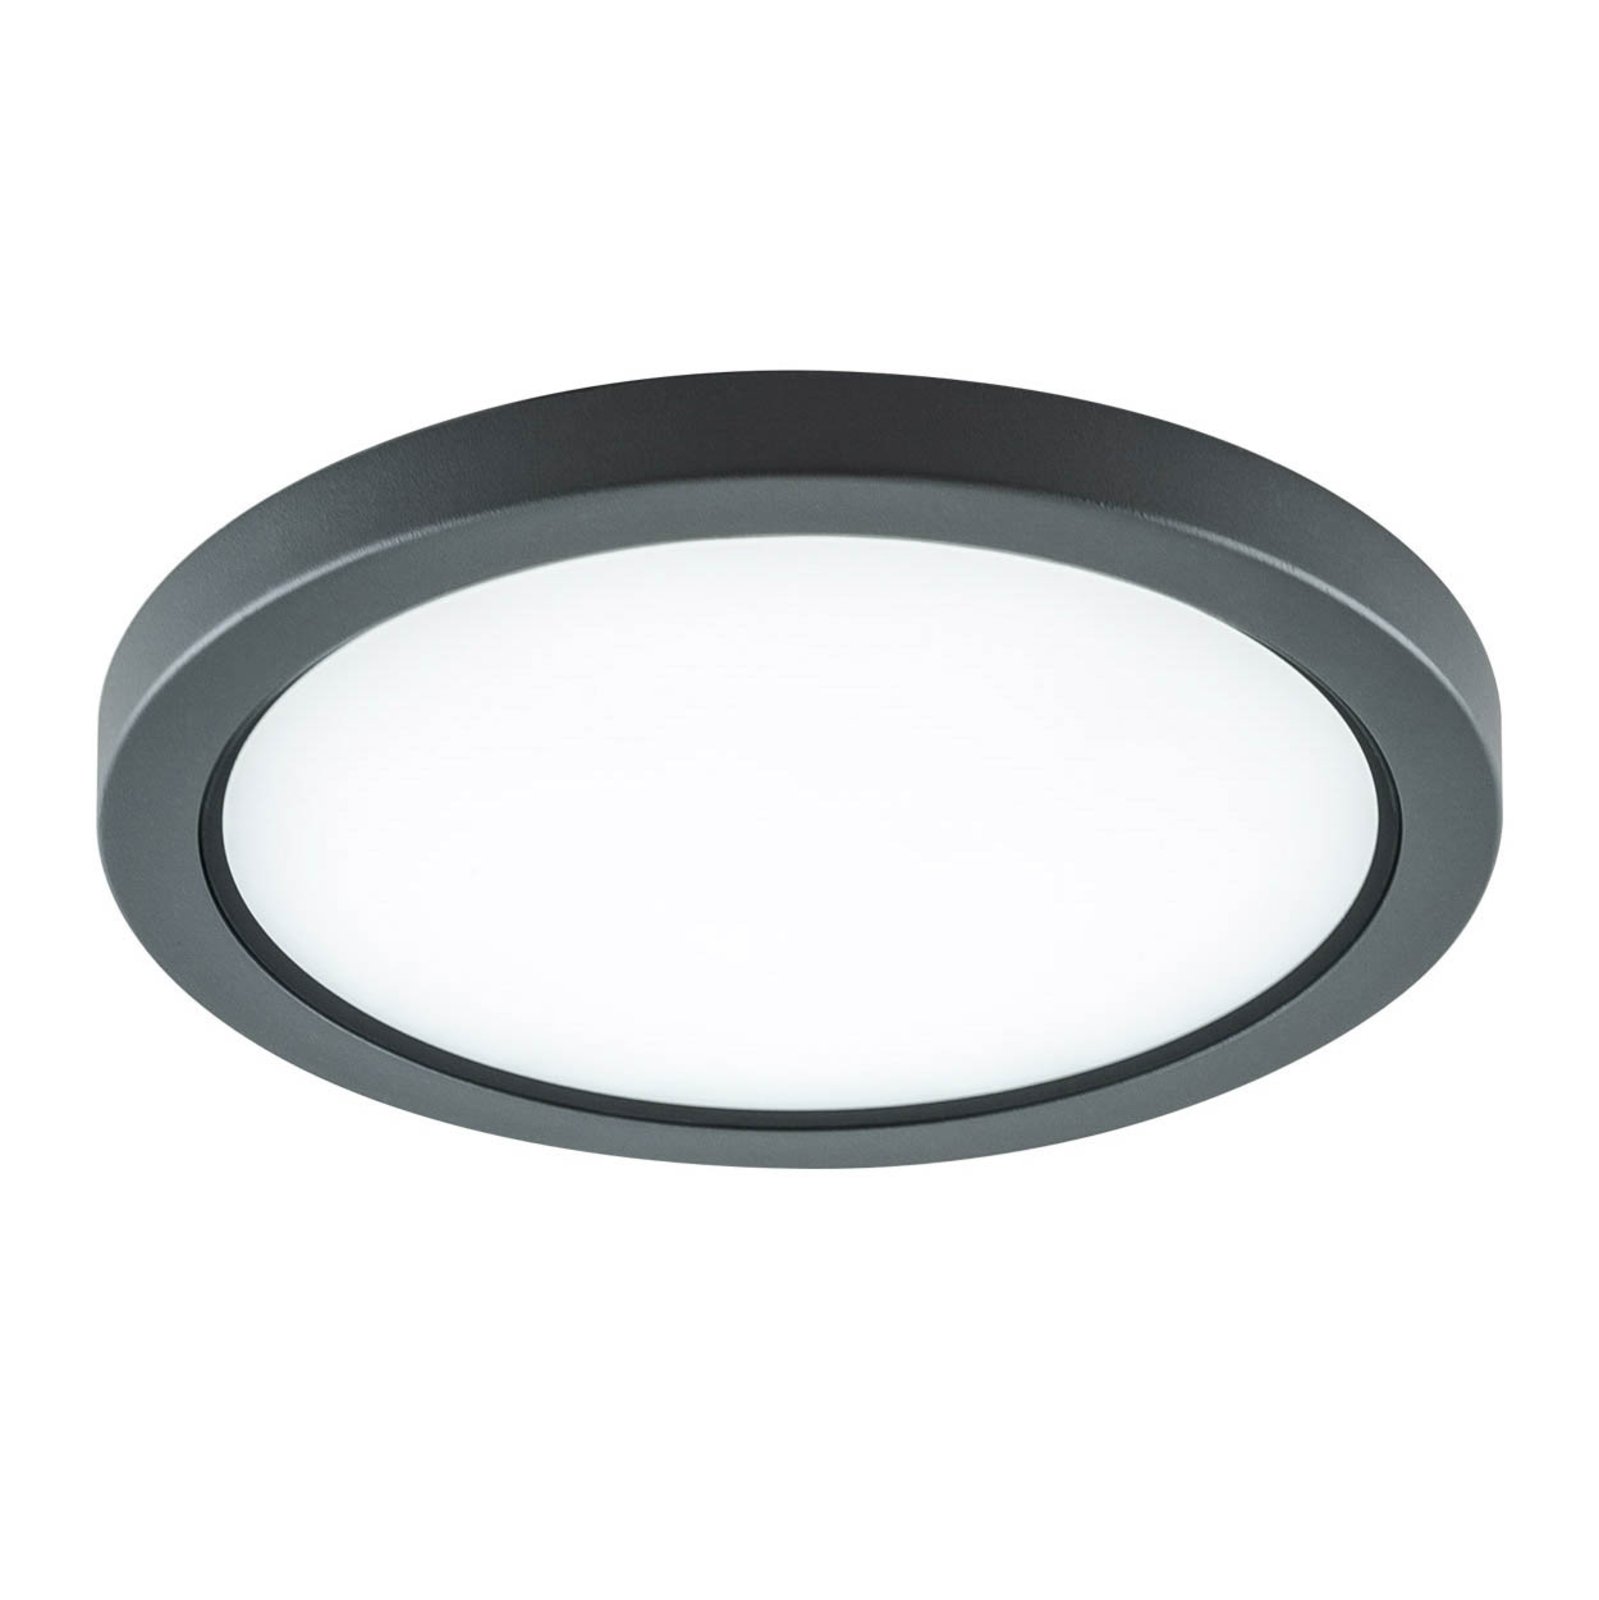 EVN Tectum LED outdoor ceiling light round glass